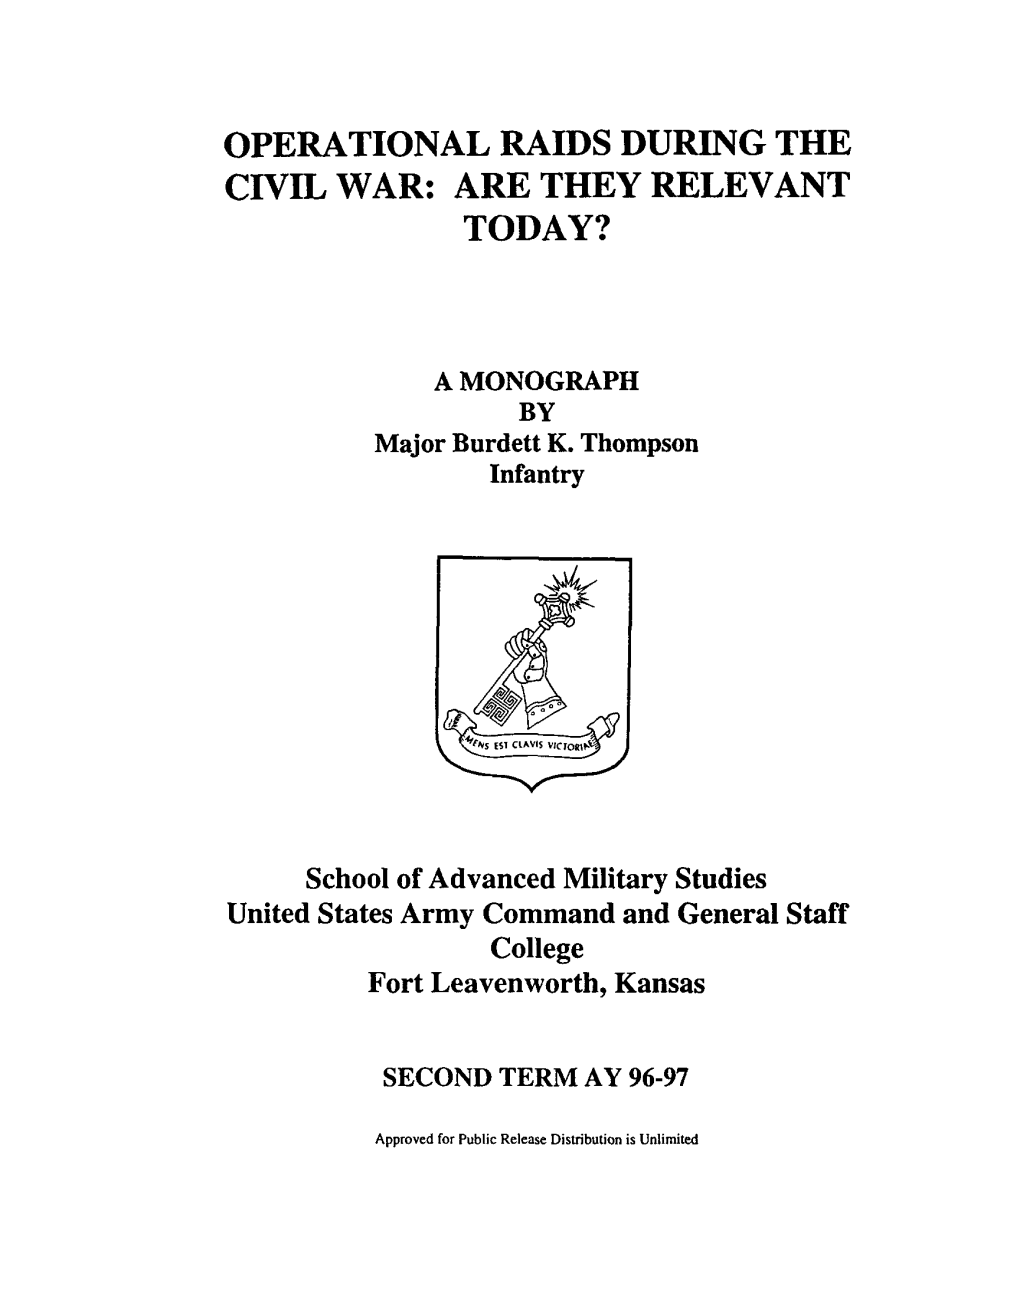 Operational Raids During the Civil War: Are They Relevant Today?